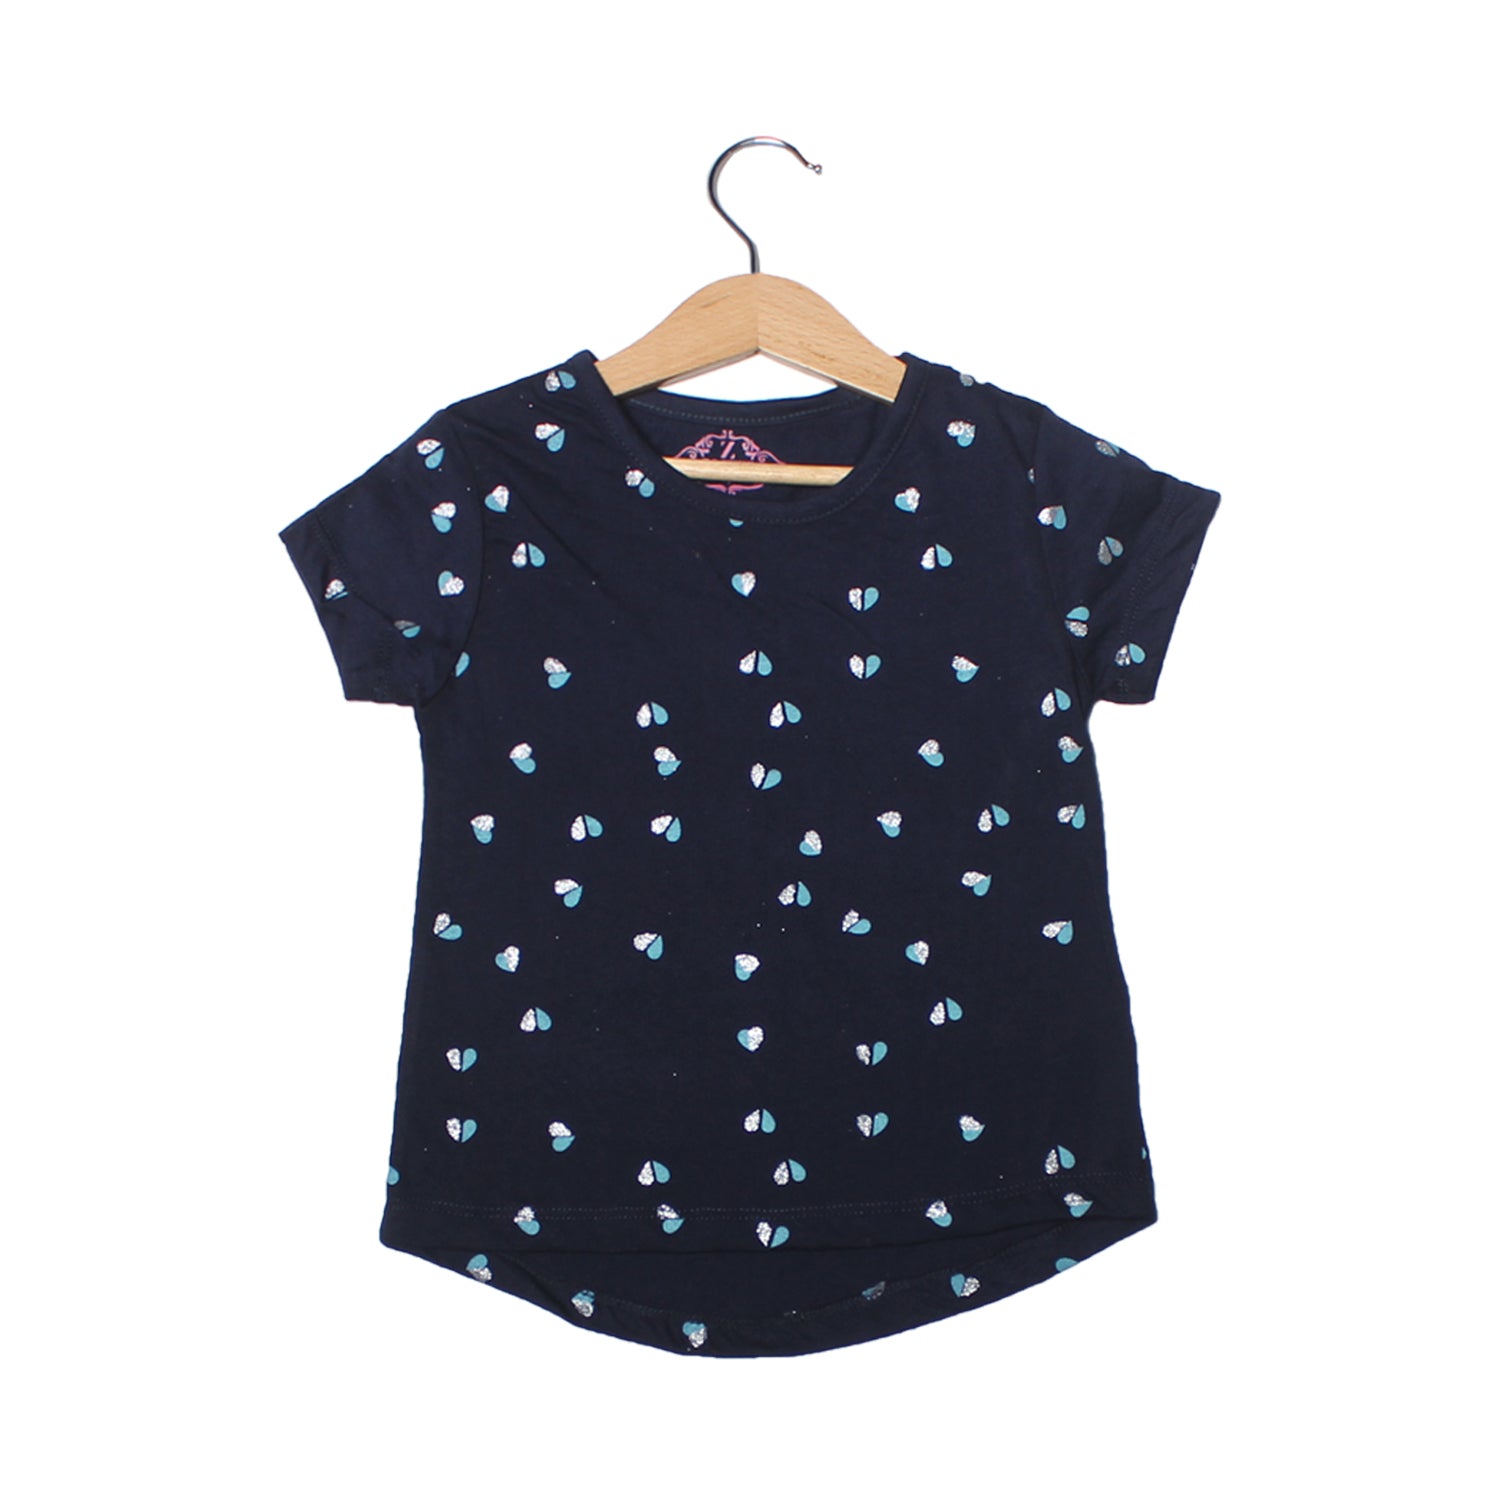 NEW NAVY BLUE LITTLE HEARTS PRINTED T-SHIRT TOP FOR GIRLS